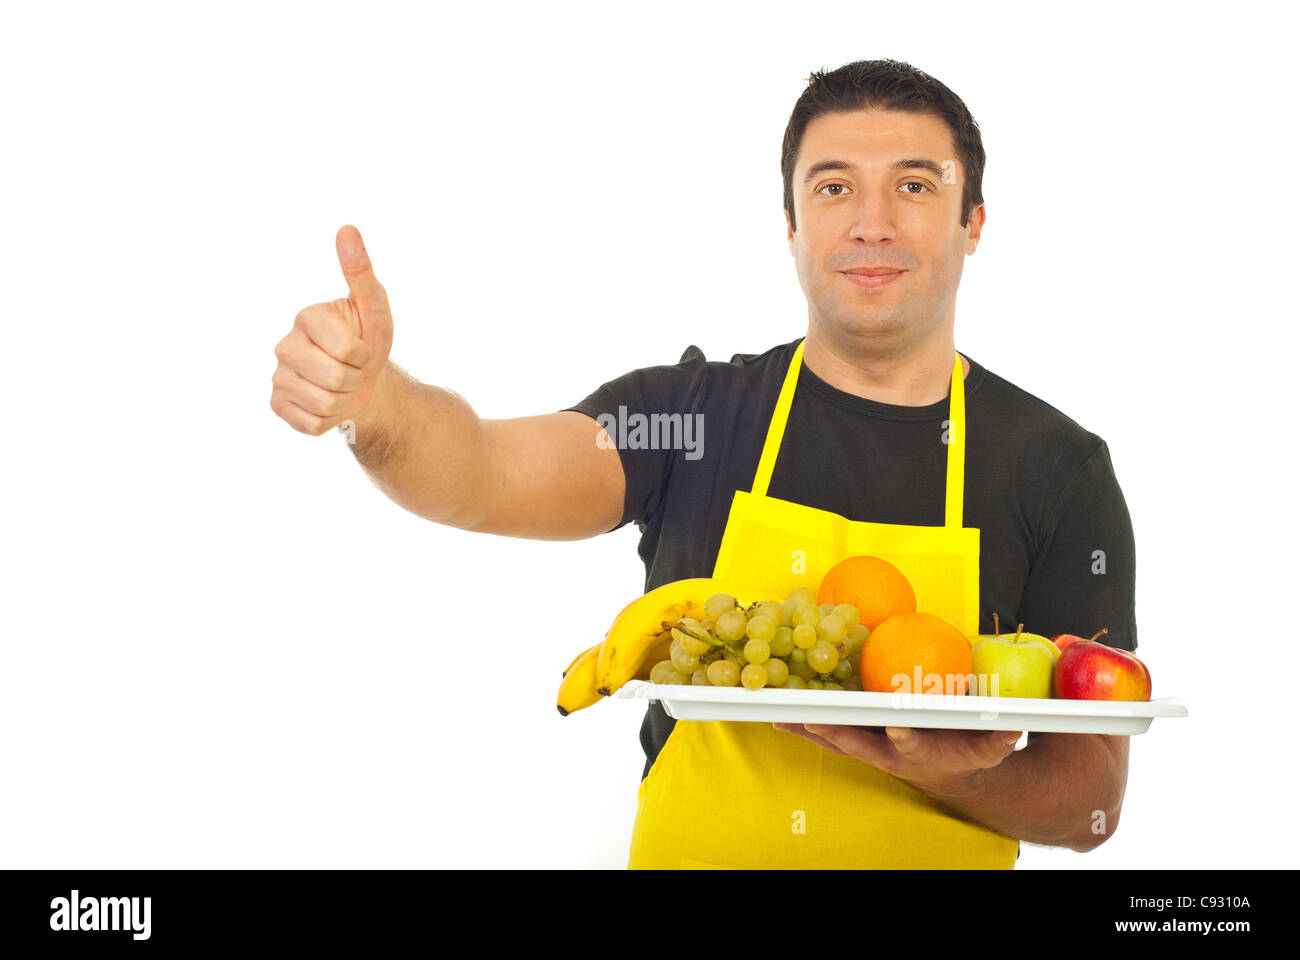 Successful fruiterer worker holding fruits and giving thumbs up isolated on white background Stock Photo